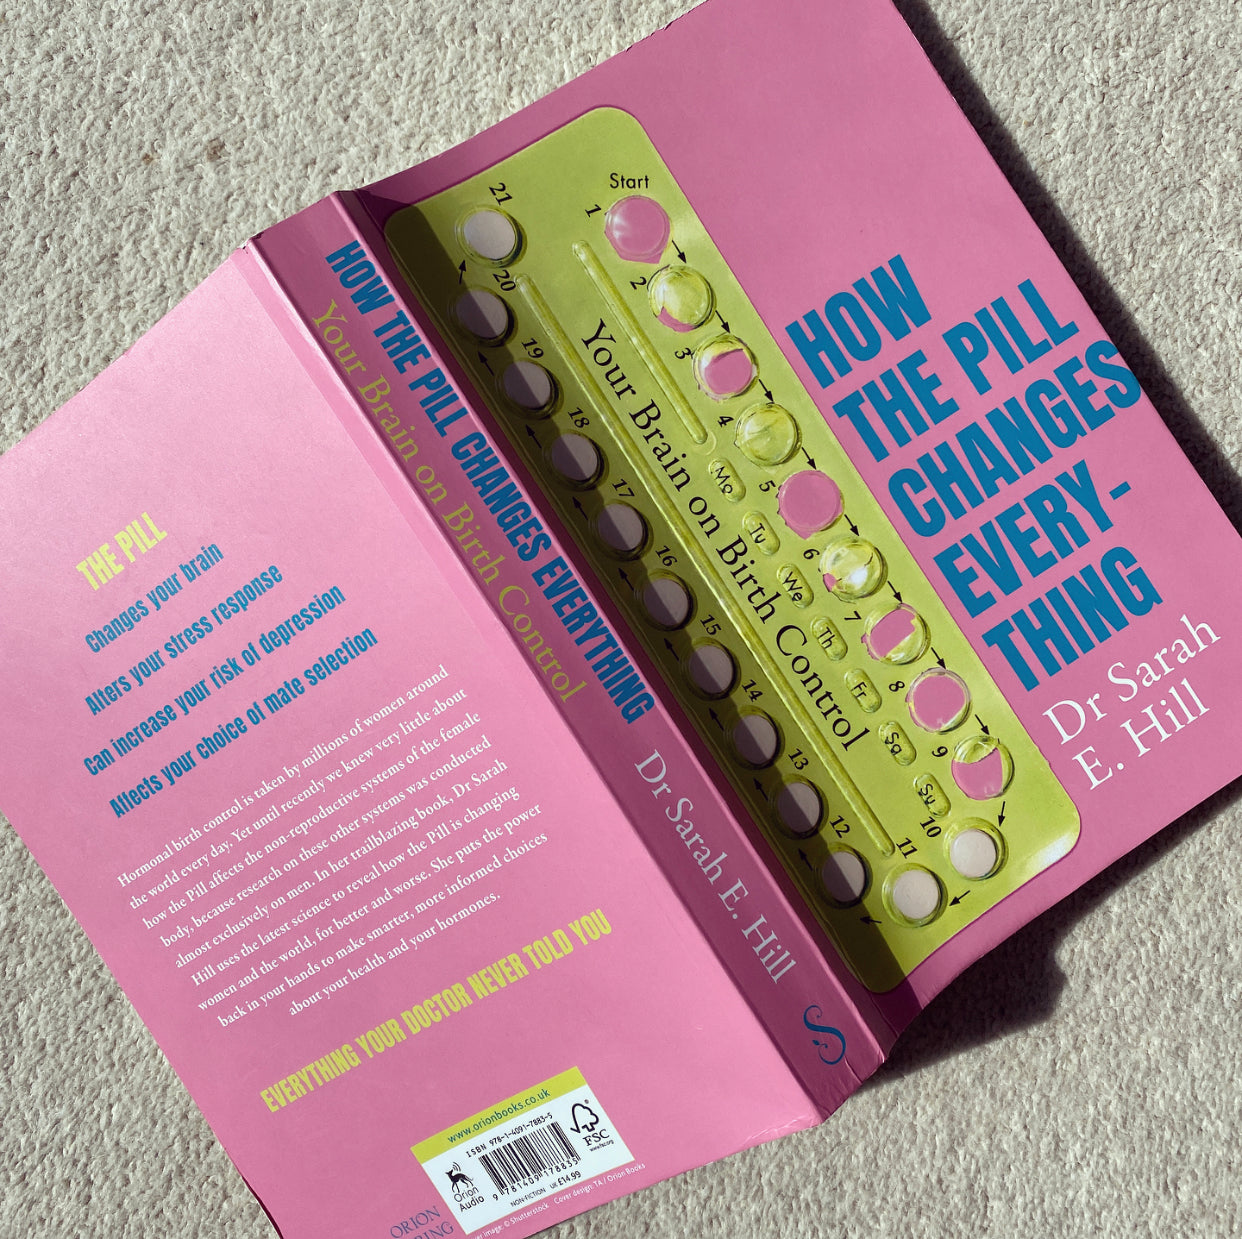 BOOK REVIEW: HOW THE PILL CHANGES EVERYTHING